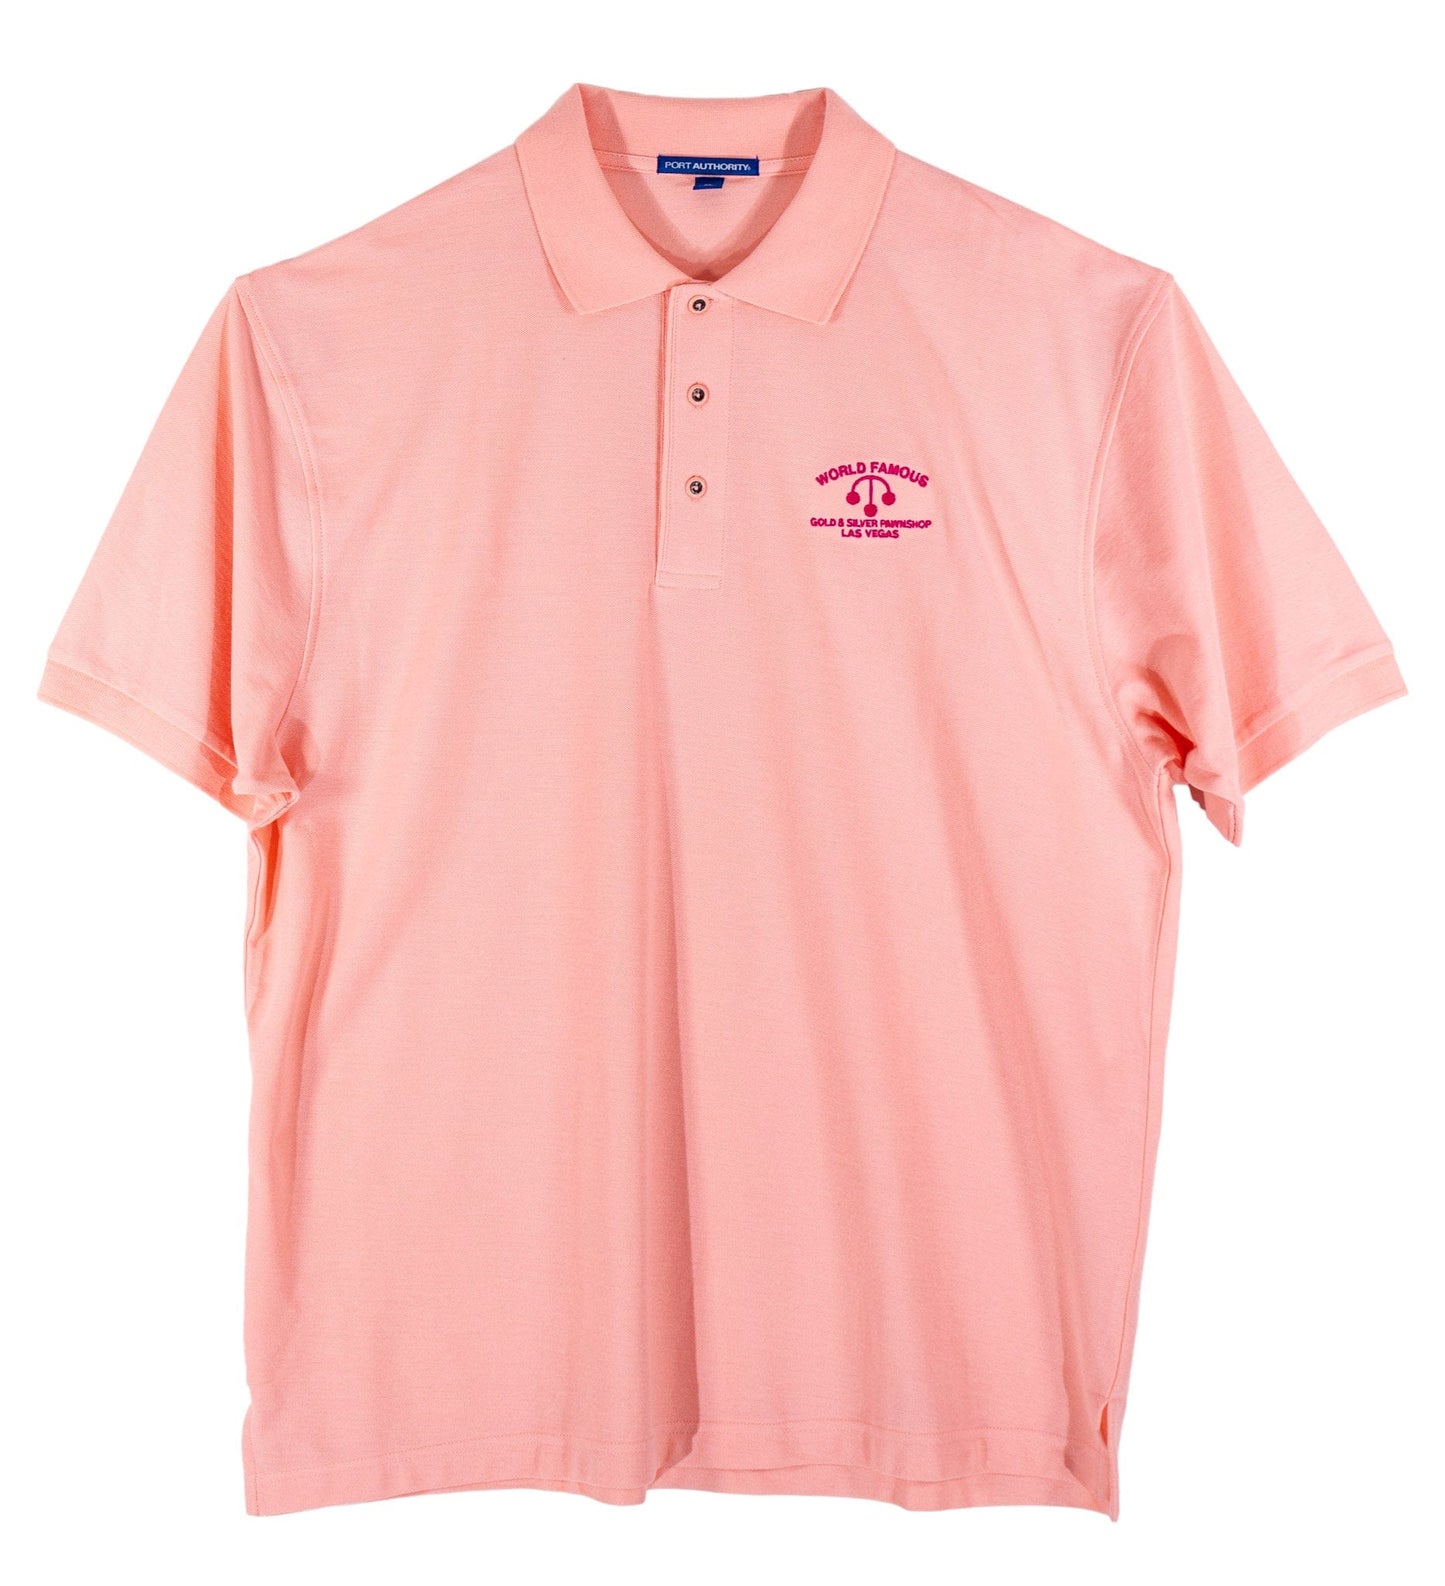 Gold & Silver Pawn Shop Pastel Pink Polo Front View